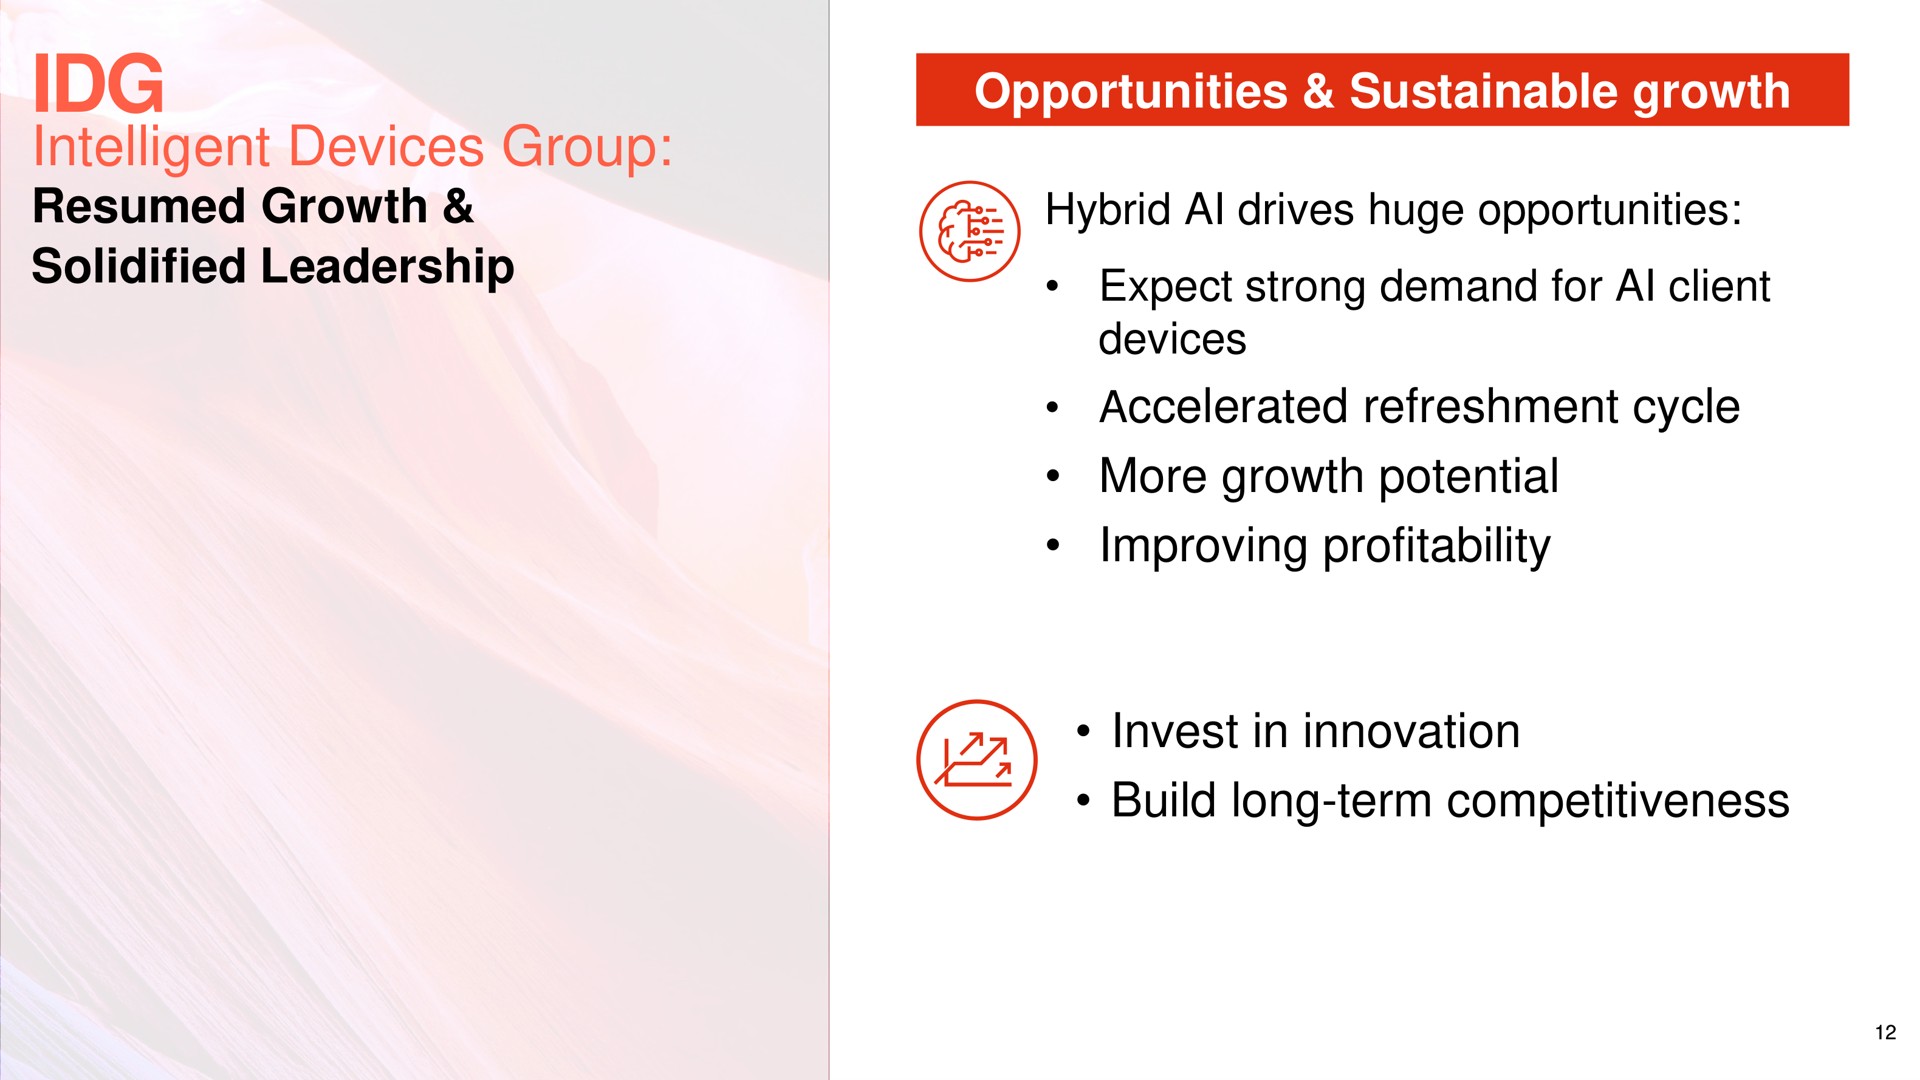 intelligent devices group resumed growth solidified leadership opportunities sustainable growth accelerated refreshment cycle more growth potential improving profitability invest in innovation build long term competitiveness hybrid drives huge expect strong demand for client | Lenovo